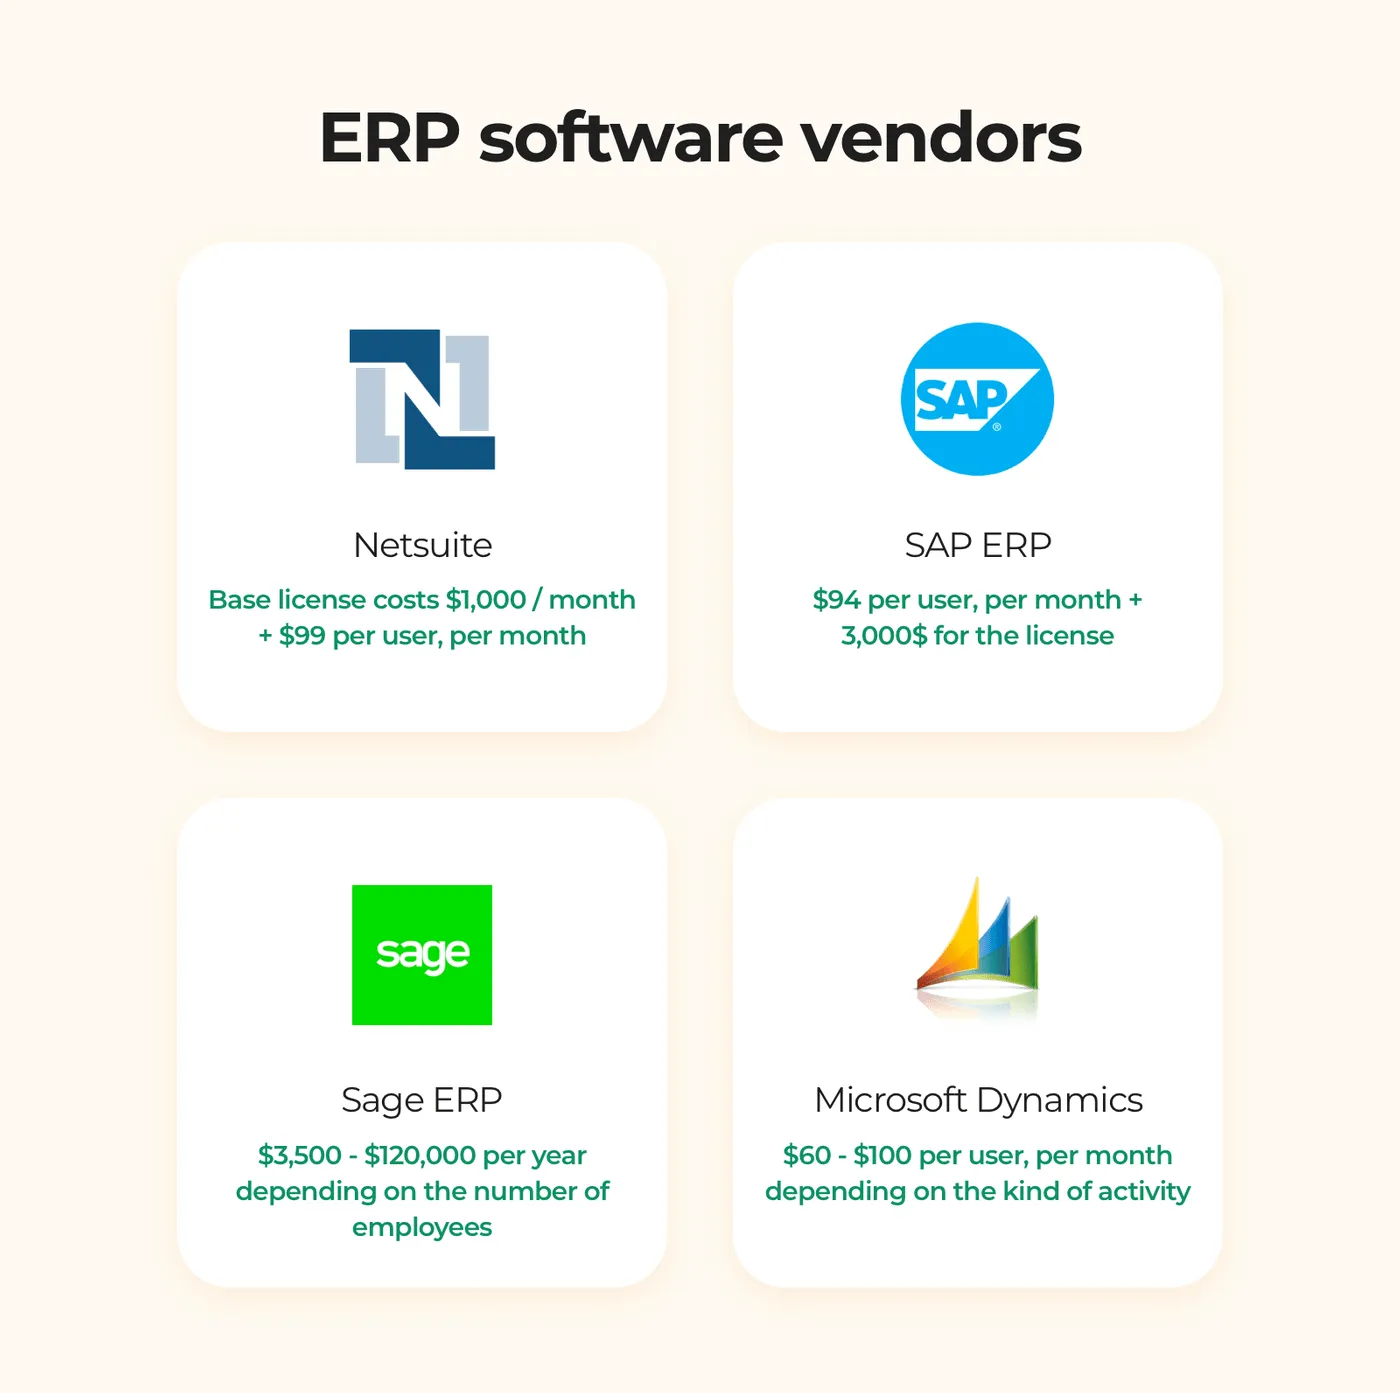 Popular third-party vendors of ERP software